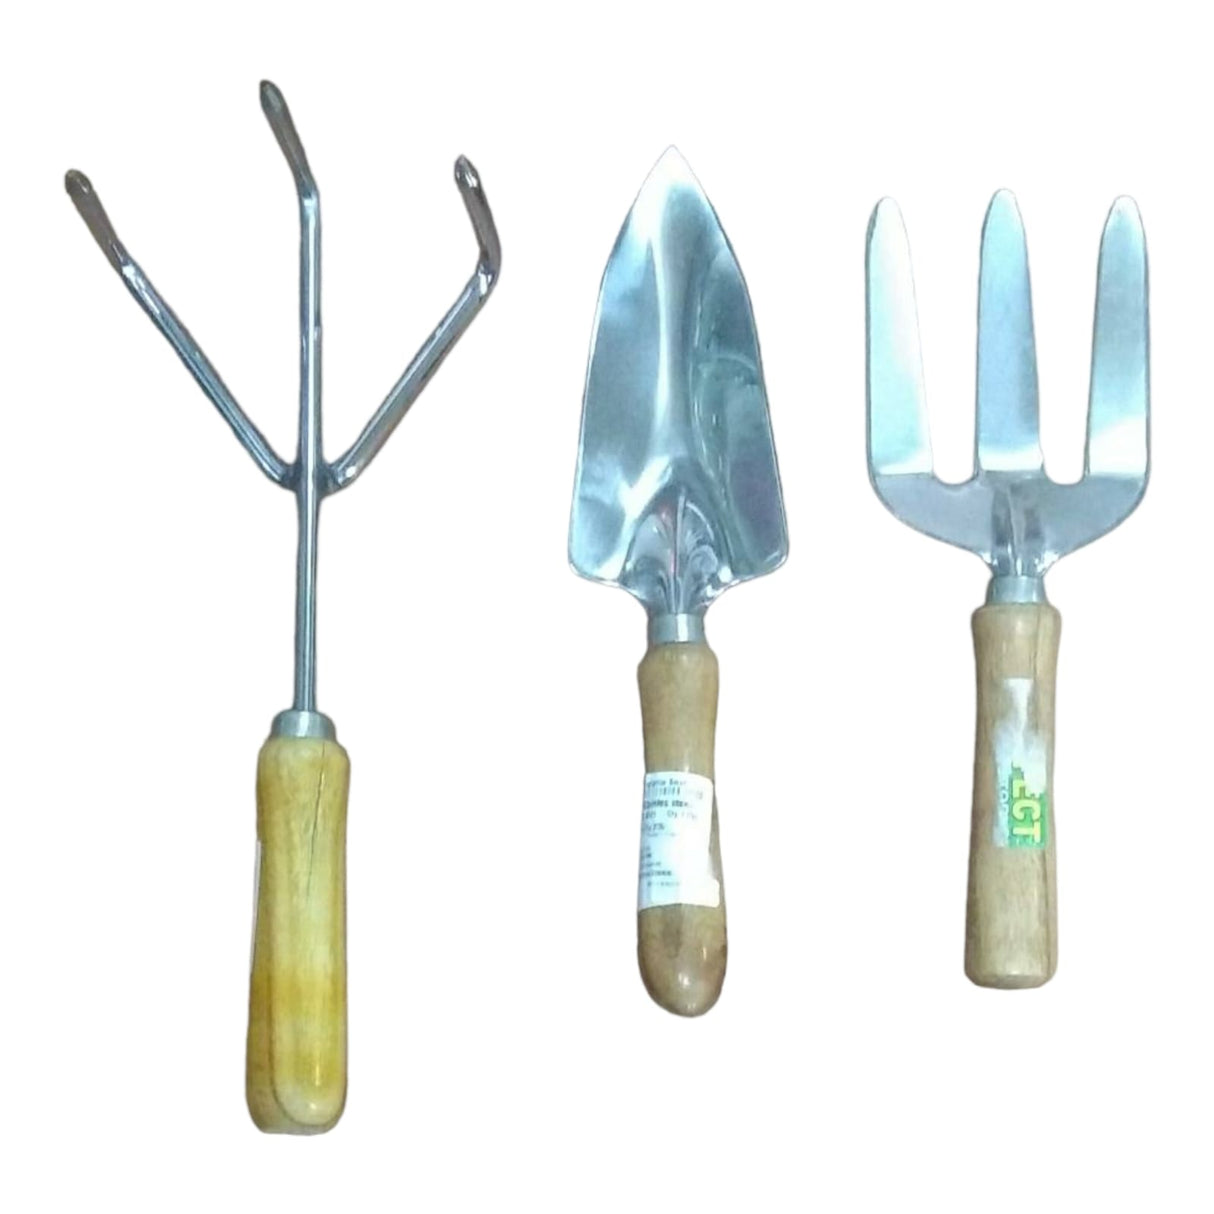 Gardening SS Tool Set with Wooden Handle, Set of 3 Tool Set